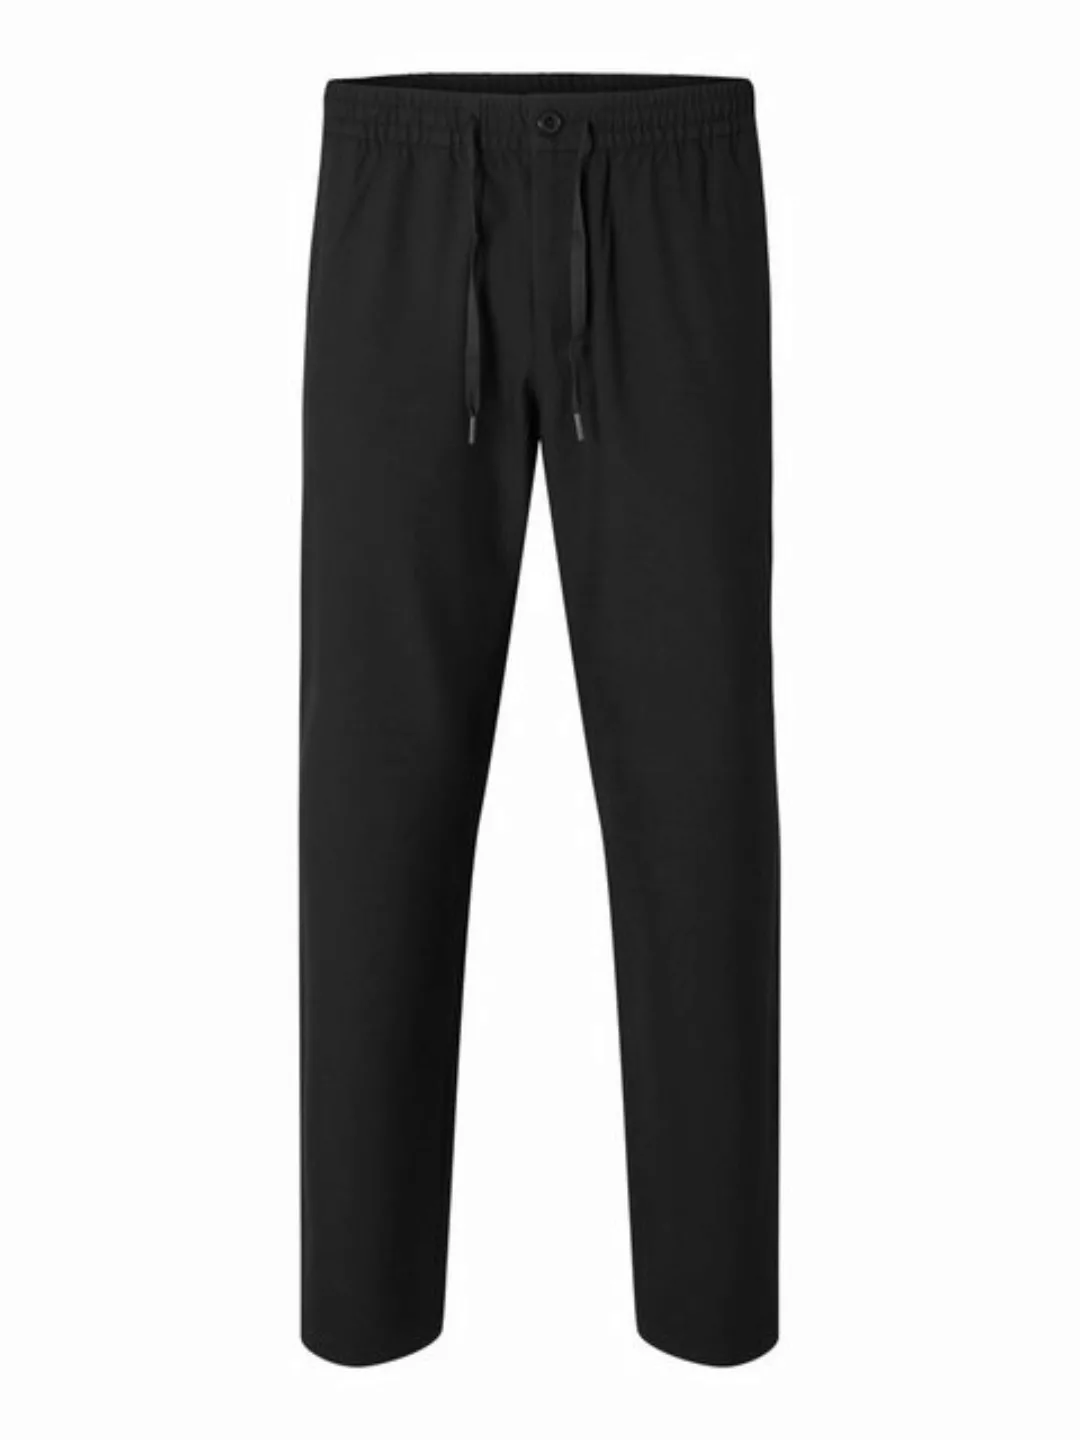 SELECTED HOMME Chinohose 196 STRAIGHT FIT HOSE günstig online kaufen